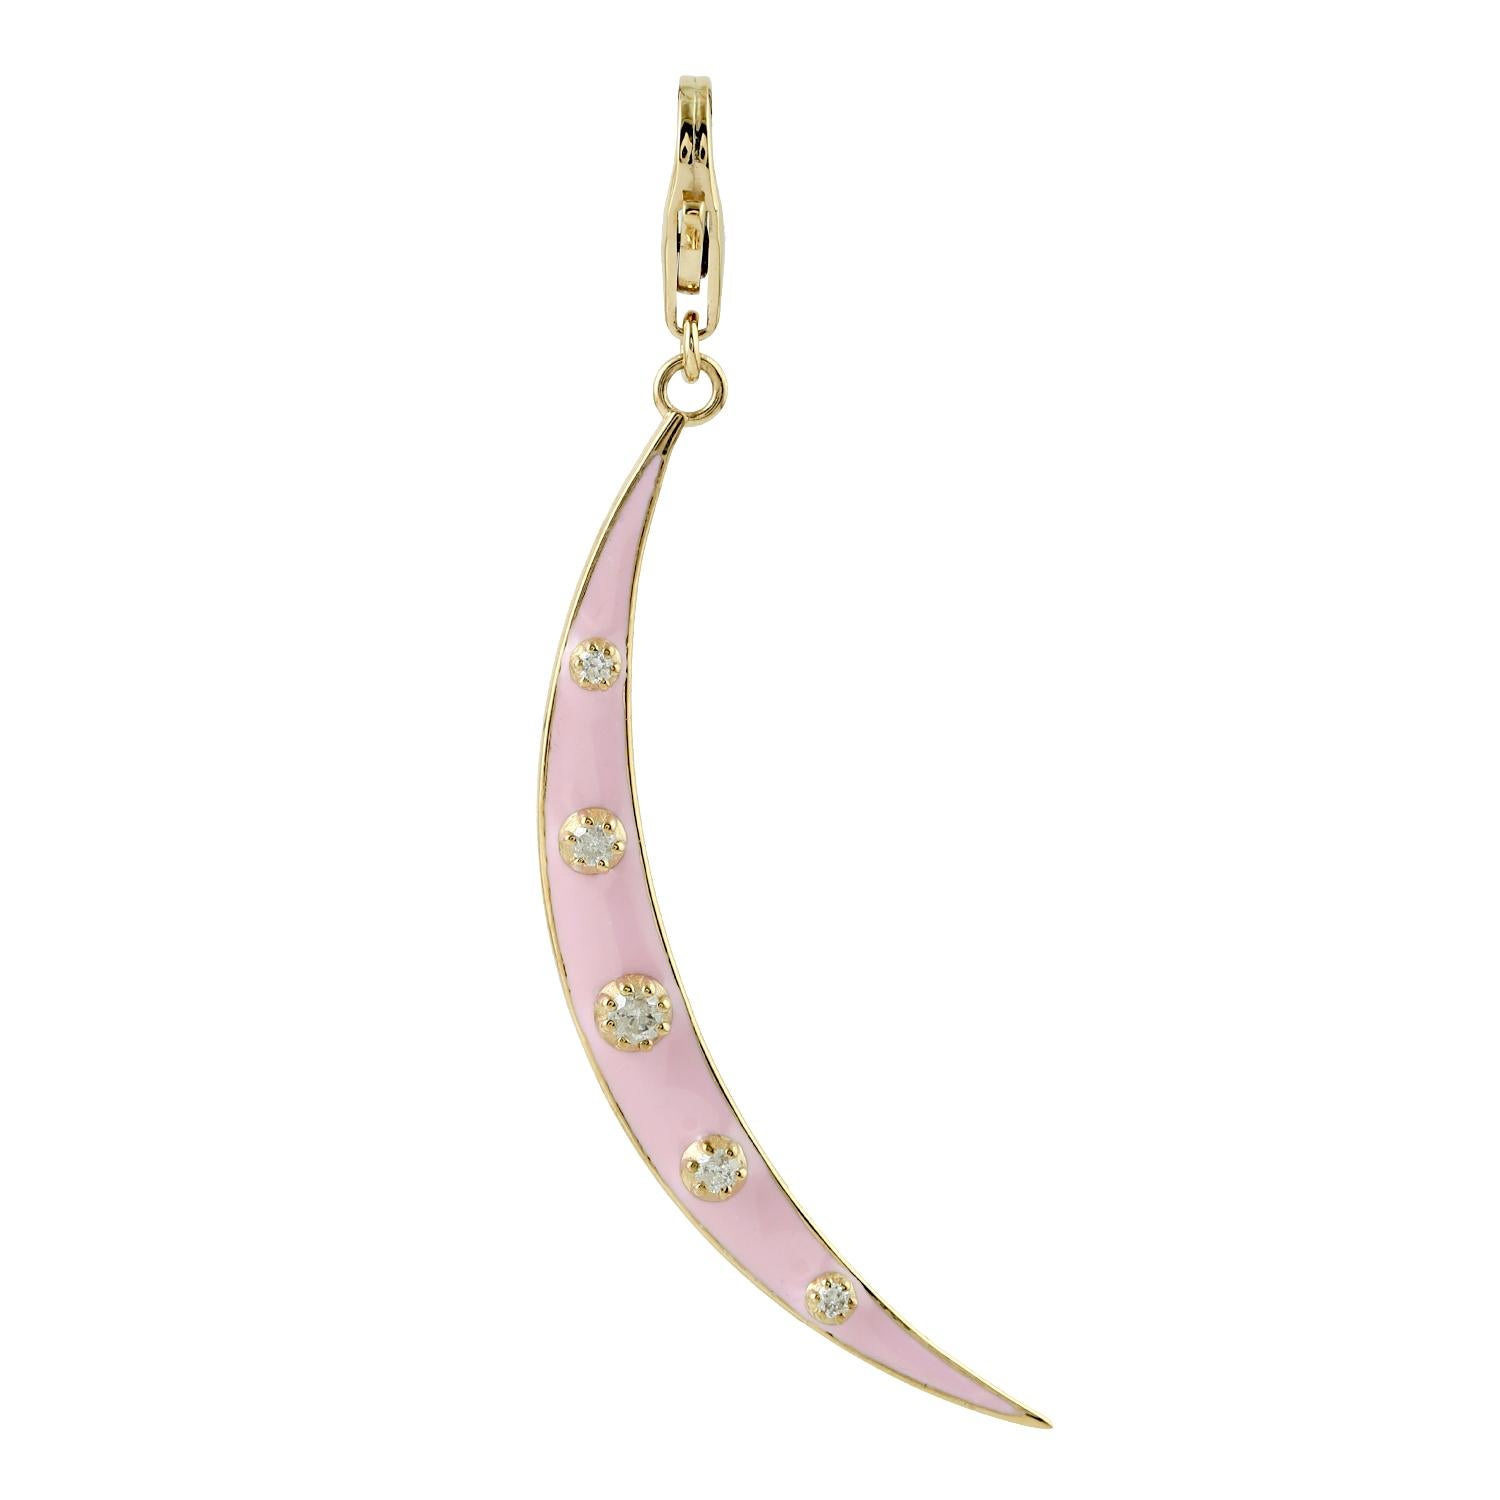 The crescent moon is hand set in 14K gold and .75 carat diamonds.

FOLLOW  MEGHNA JEWELS storefront to view the latest collection & exclusive pieces.  Meghna Jewels is proudly rated as a Top Seller on 1stdibs with 5 star customer reviews. All items